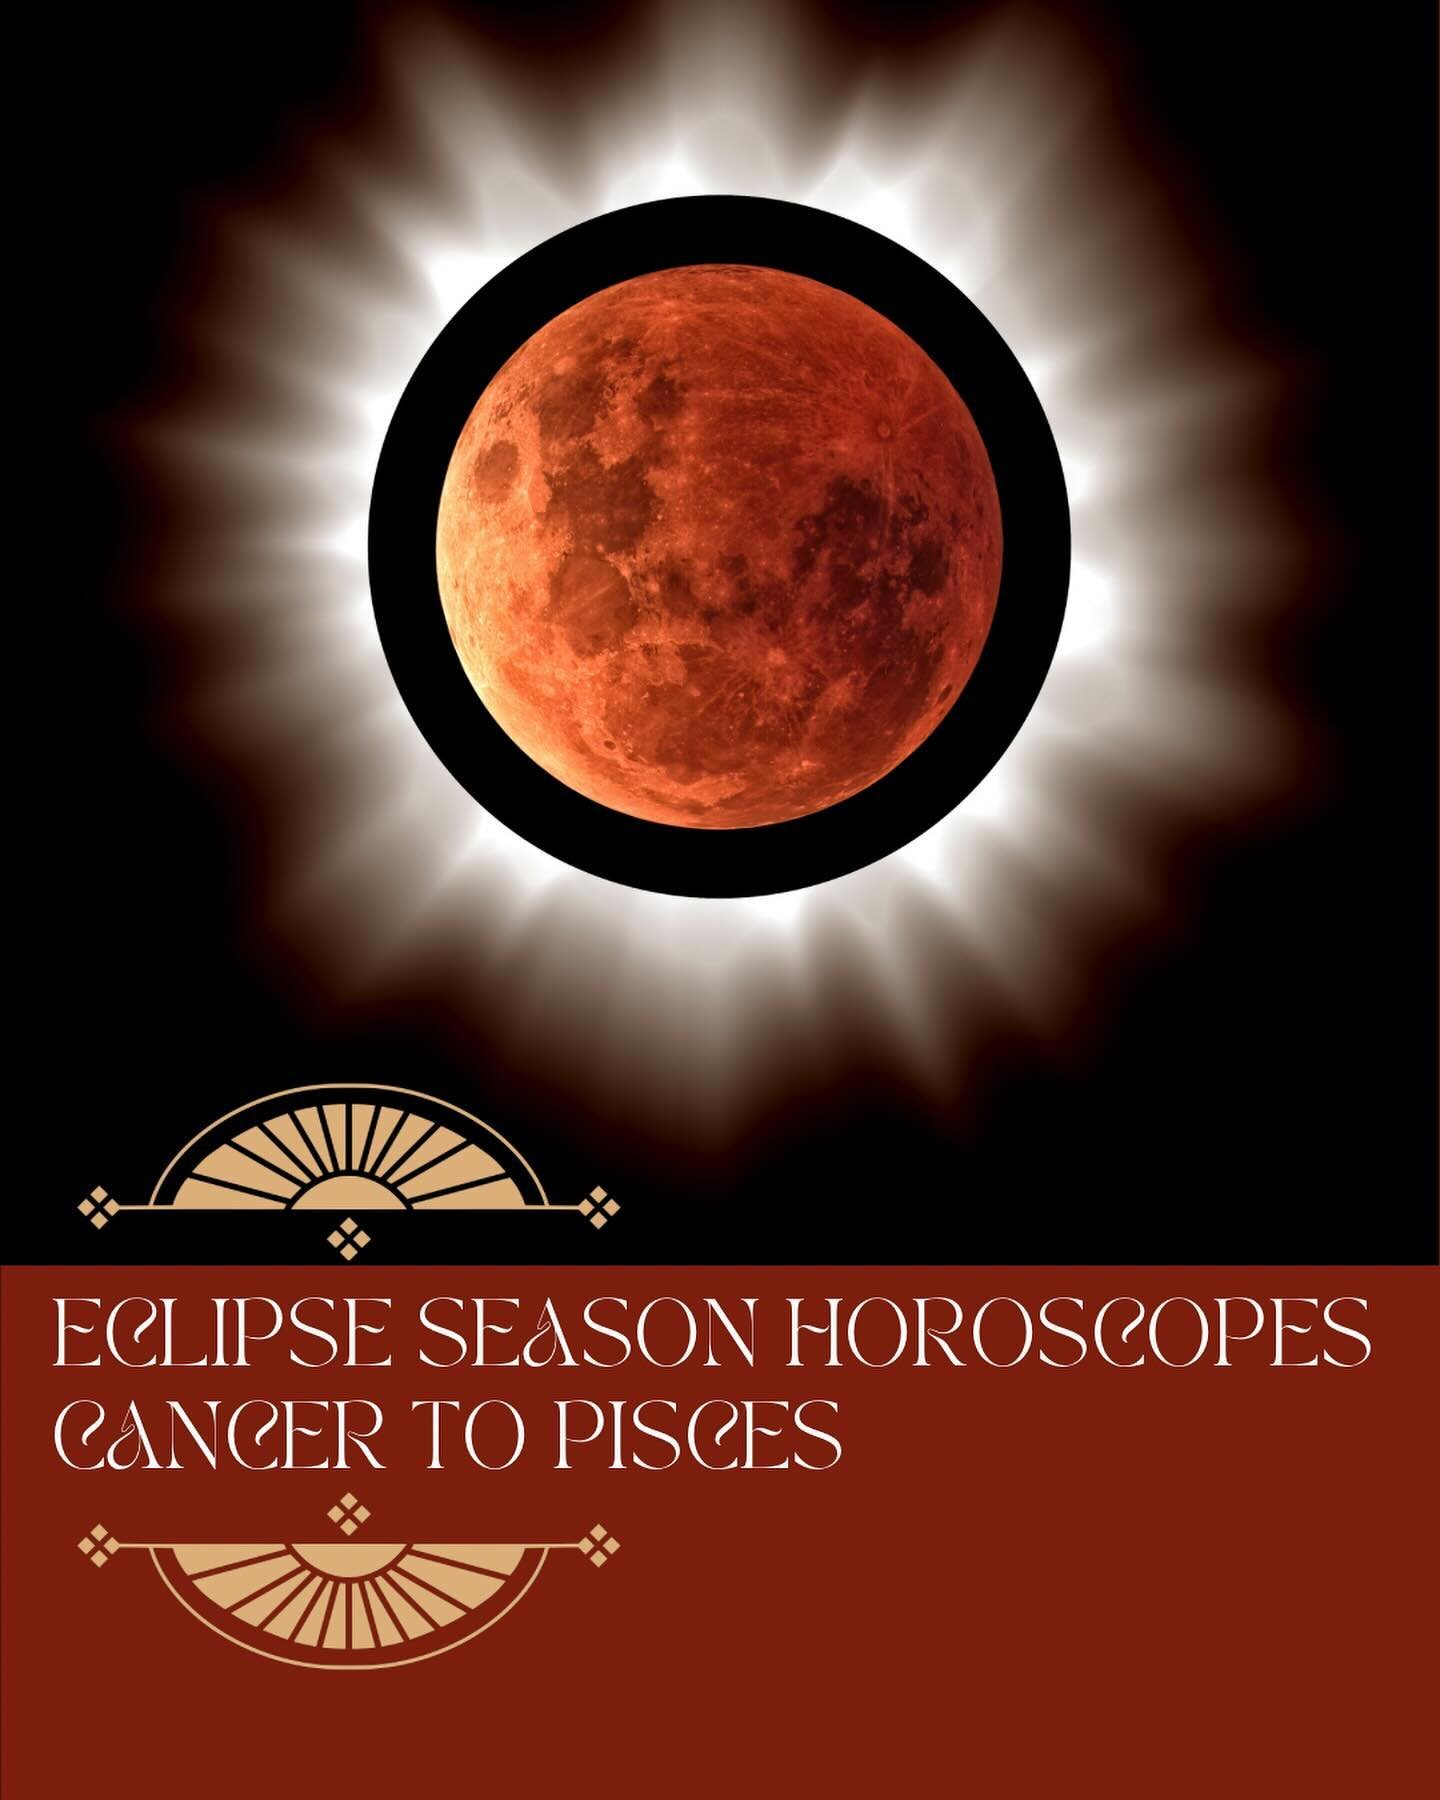 ⚡️Eclipse Season Horoscopes ⚡️
⚡️Radical Acceptance of the Self⚡️

✨Check my previous post to find out everything about eclipses:

✨What are eclipses? 
✨How often they happen 
✨Eclipses &amp; collective evolution 
✨What to expect this eclipse season 